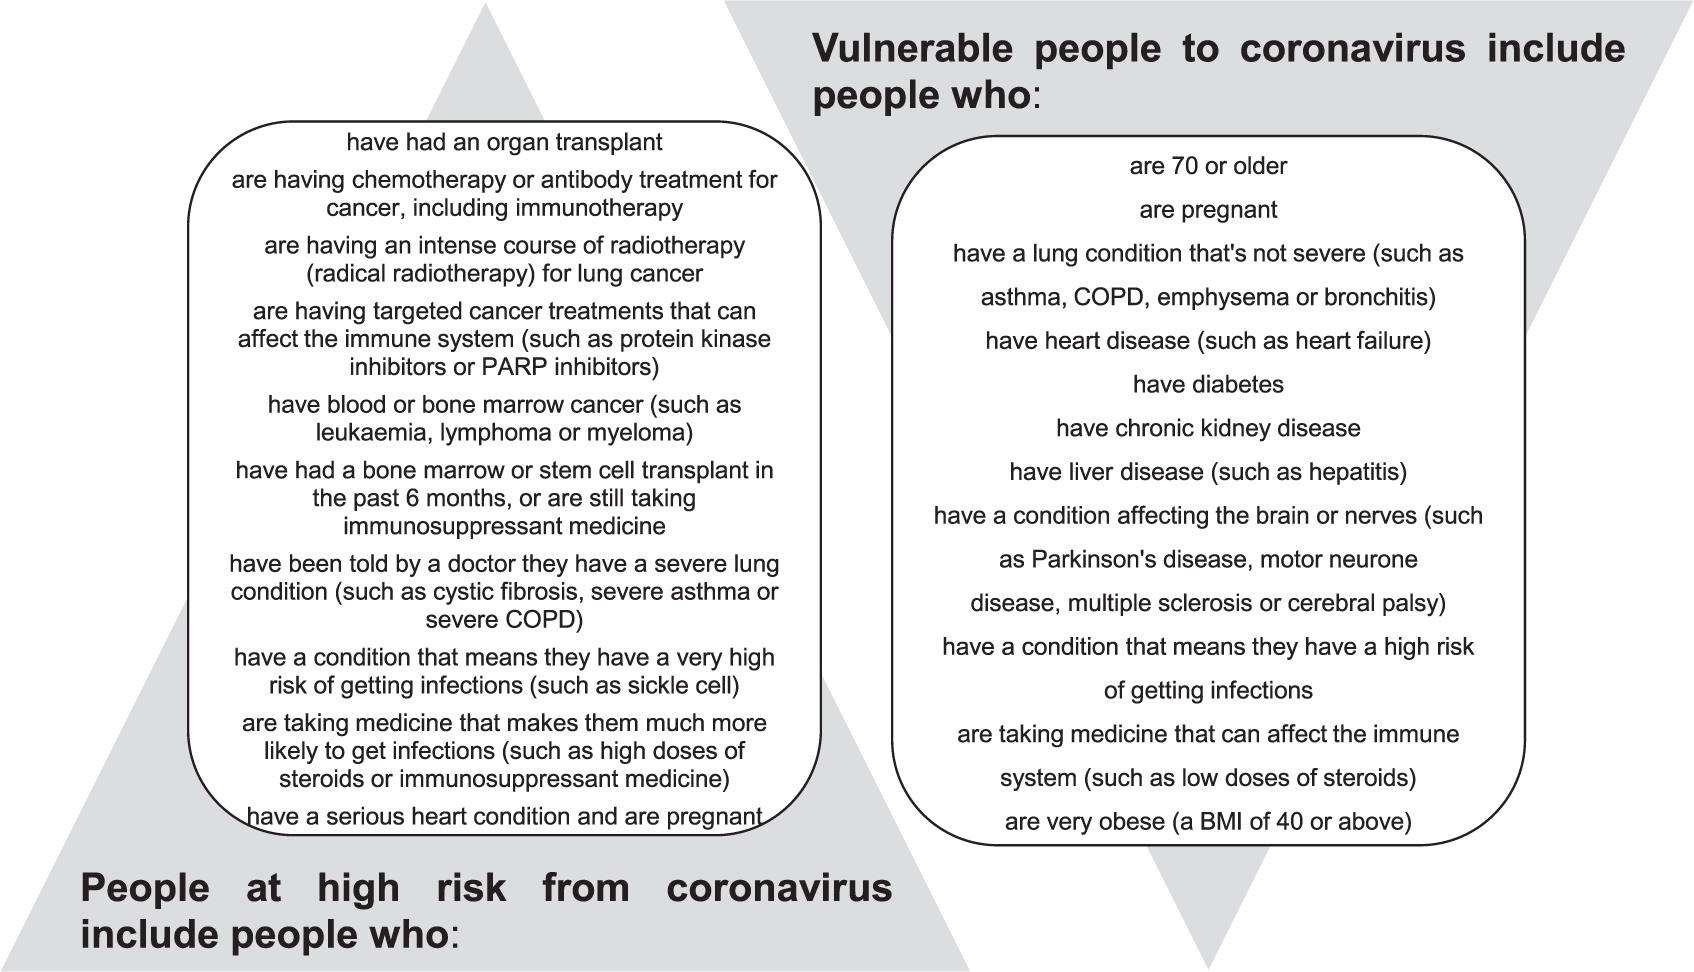 Vulnerable and high-risk people to coronavirus (adapted from [9]).